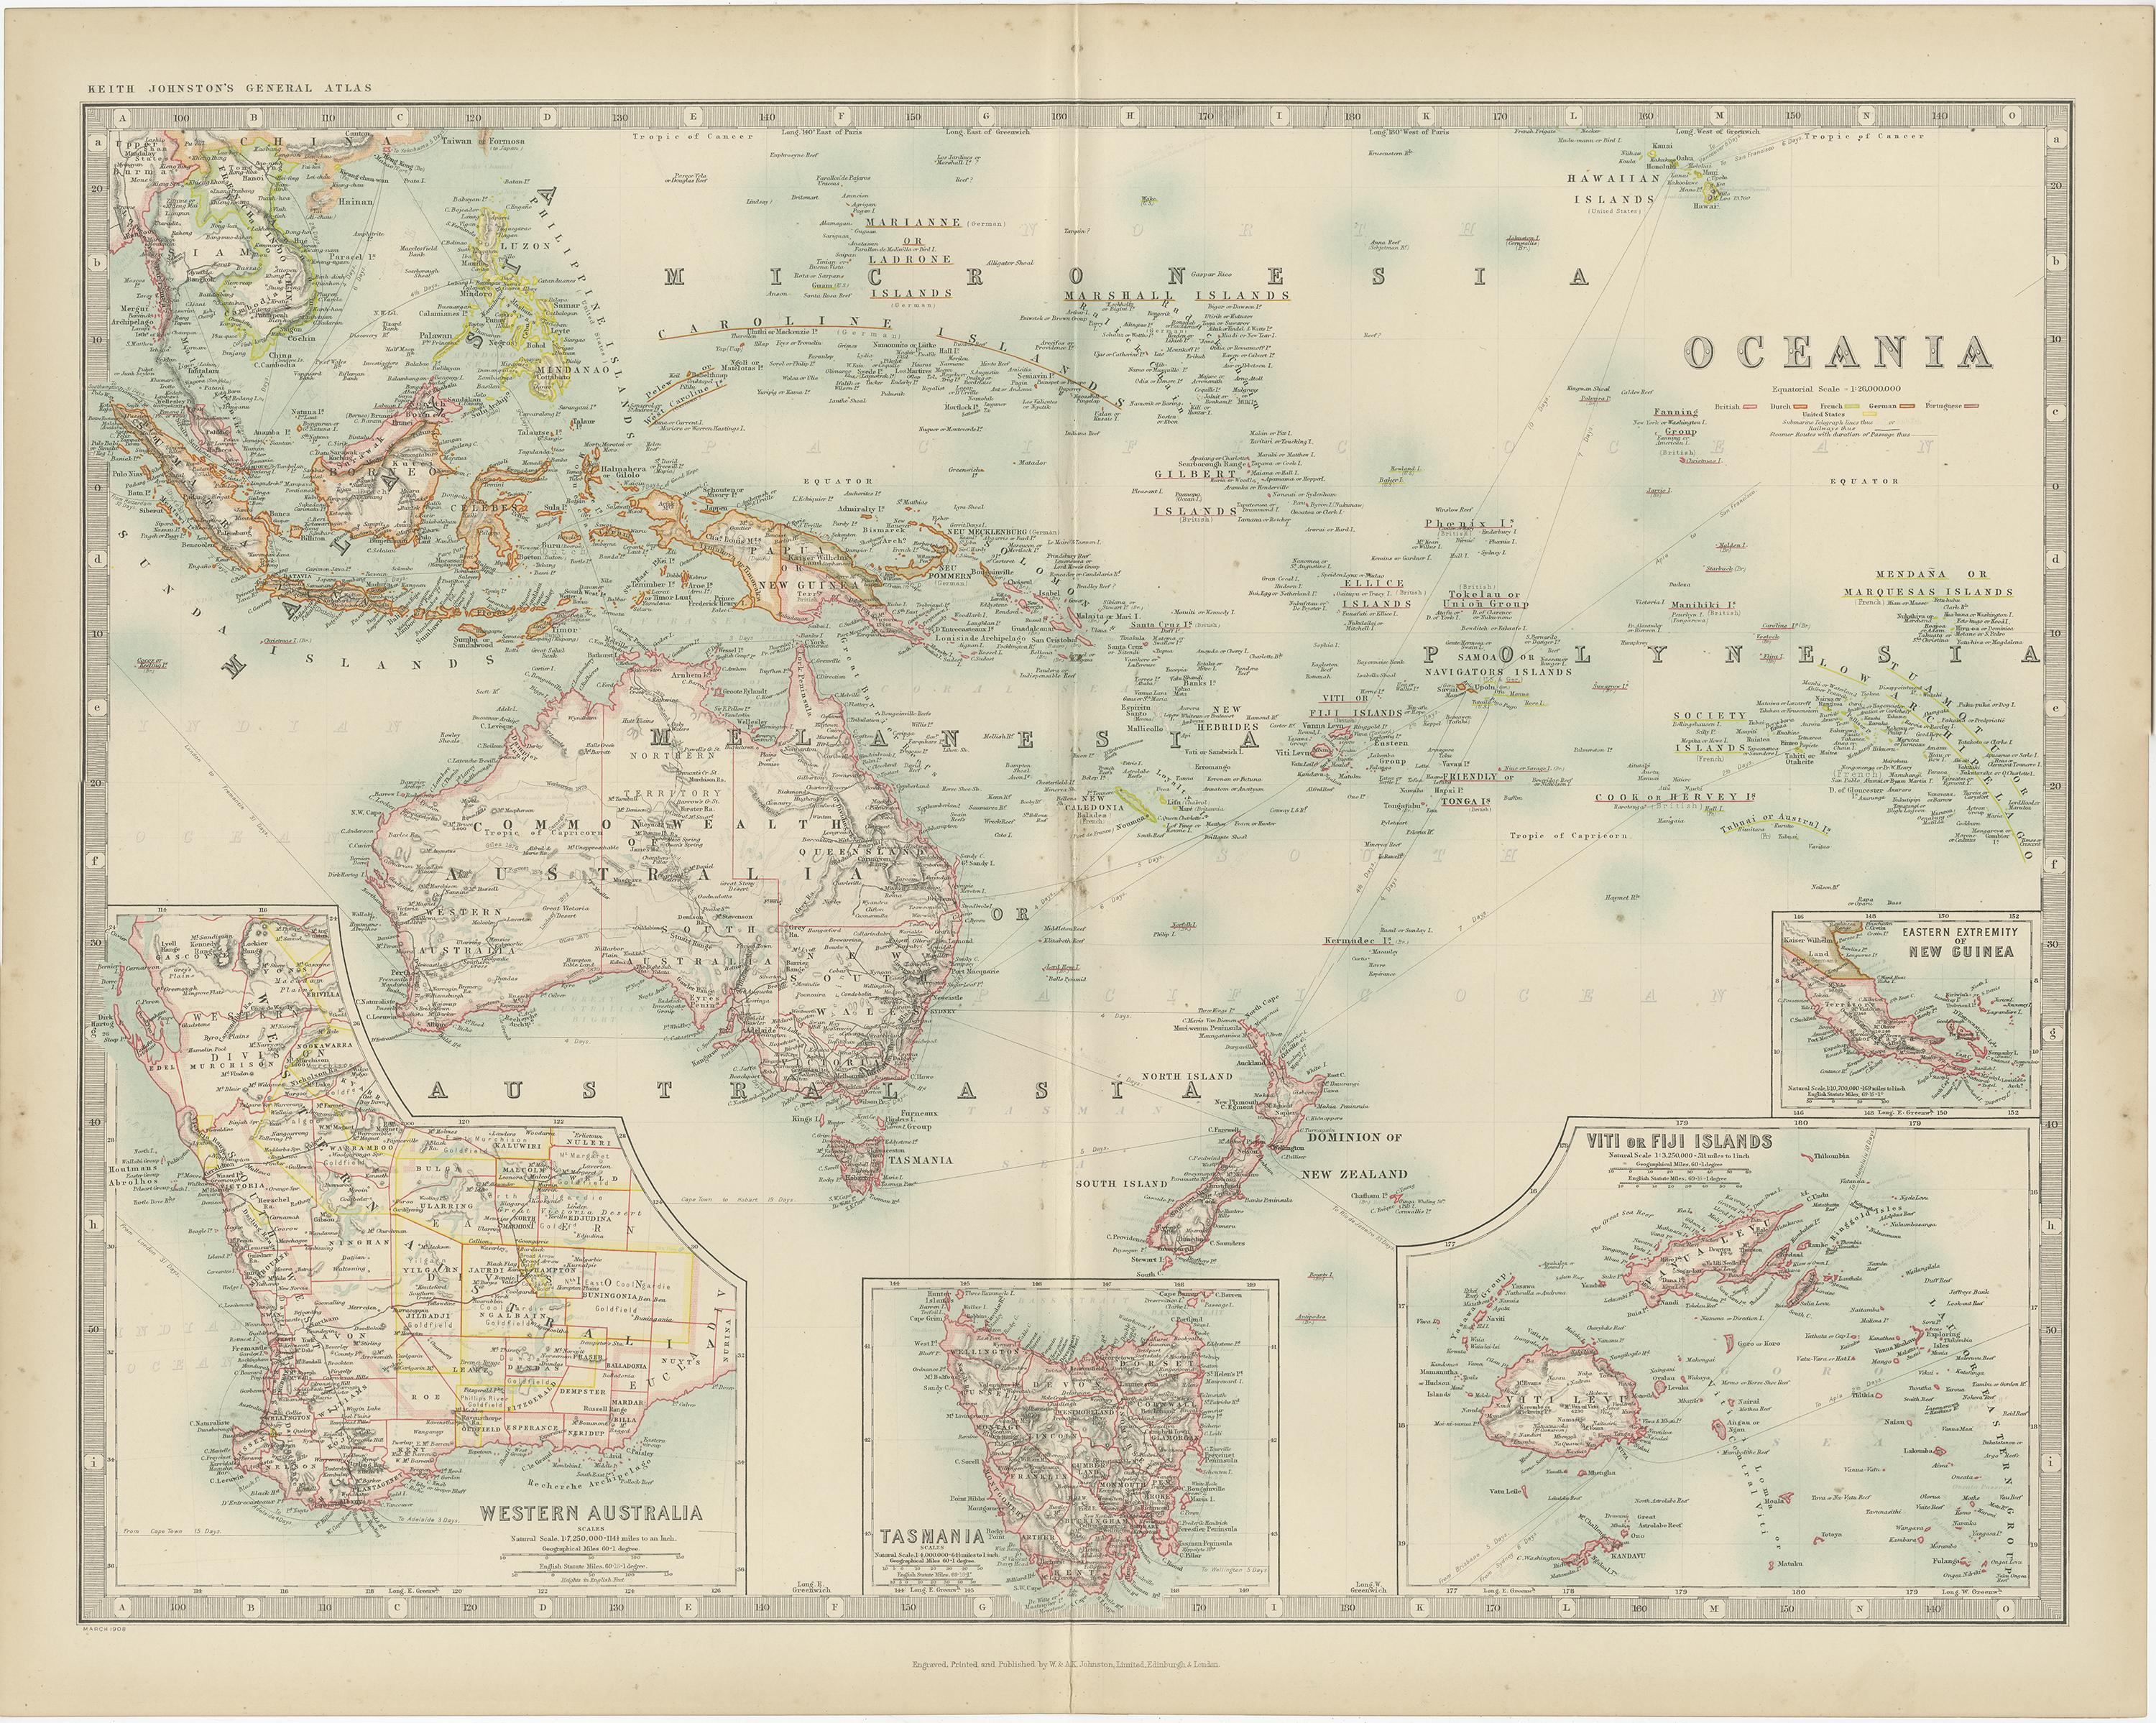 Antique map titled 'Oceania'. Original antique map of Oceania. With inset maps of Western Australia, Tasmania, the Fiji Islands and New Guinea. This map originates from the ‘Royal Atlas of Modern Geography’. Published by W. & A.K. Johnston, 1909.